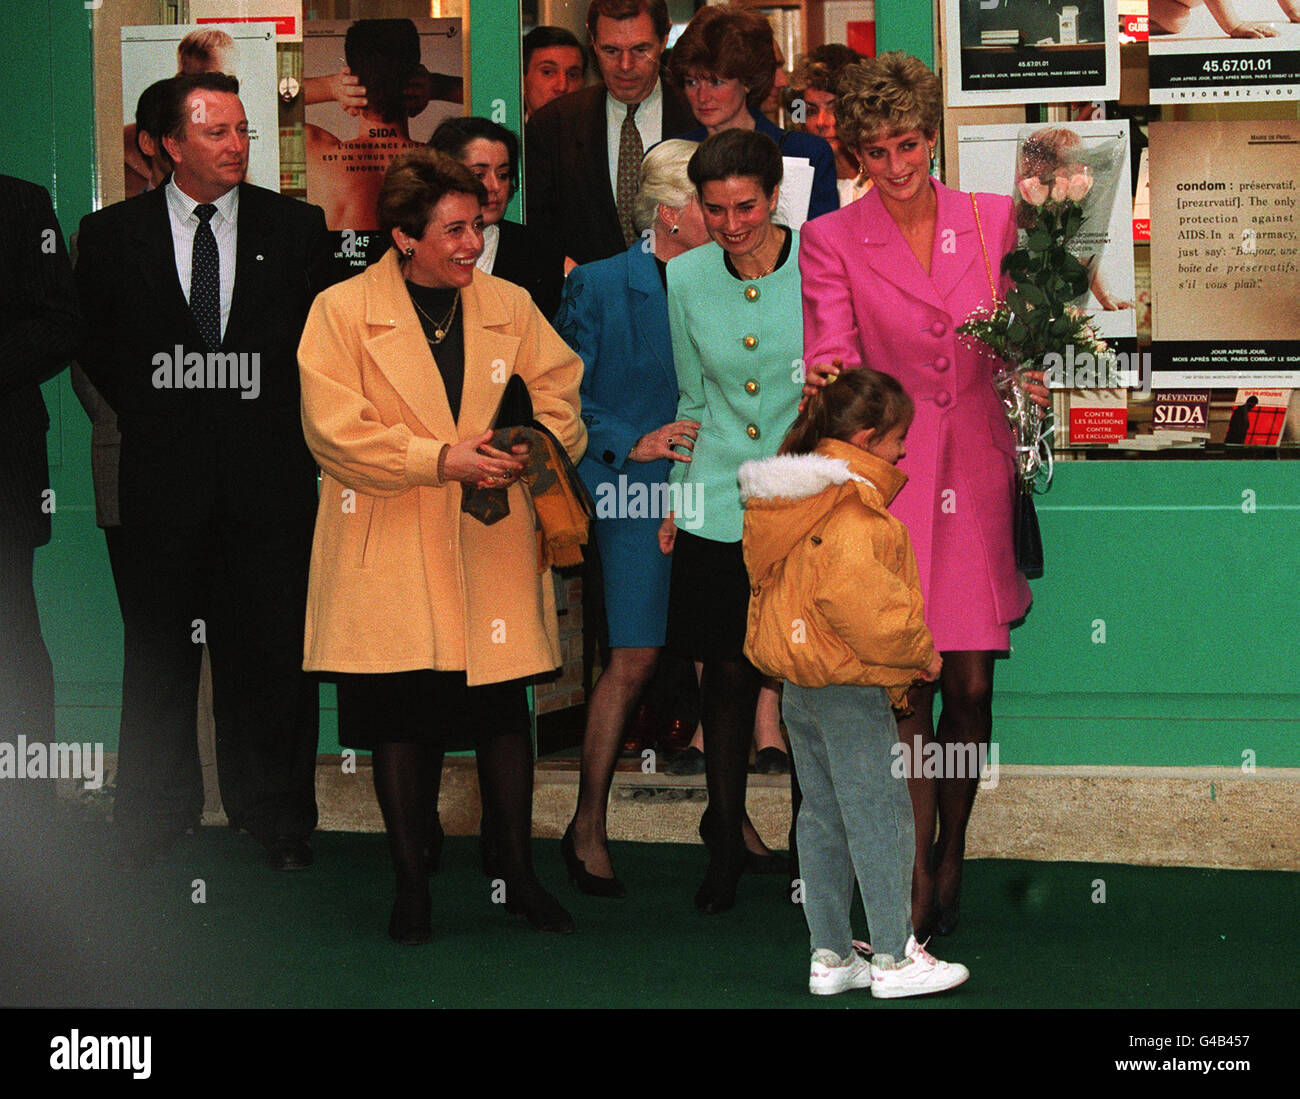 PA NEWS PHOTO 14/11/92 PRINCESS DIANA WITH HER SISTER (SARAH MCCORQUODALE) VISITED AN AIDS INFORMATION KIOSK IN THE LATIN QUARTER OF PARIS ON HER VISIT TO FRANCE. Stock Photo